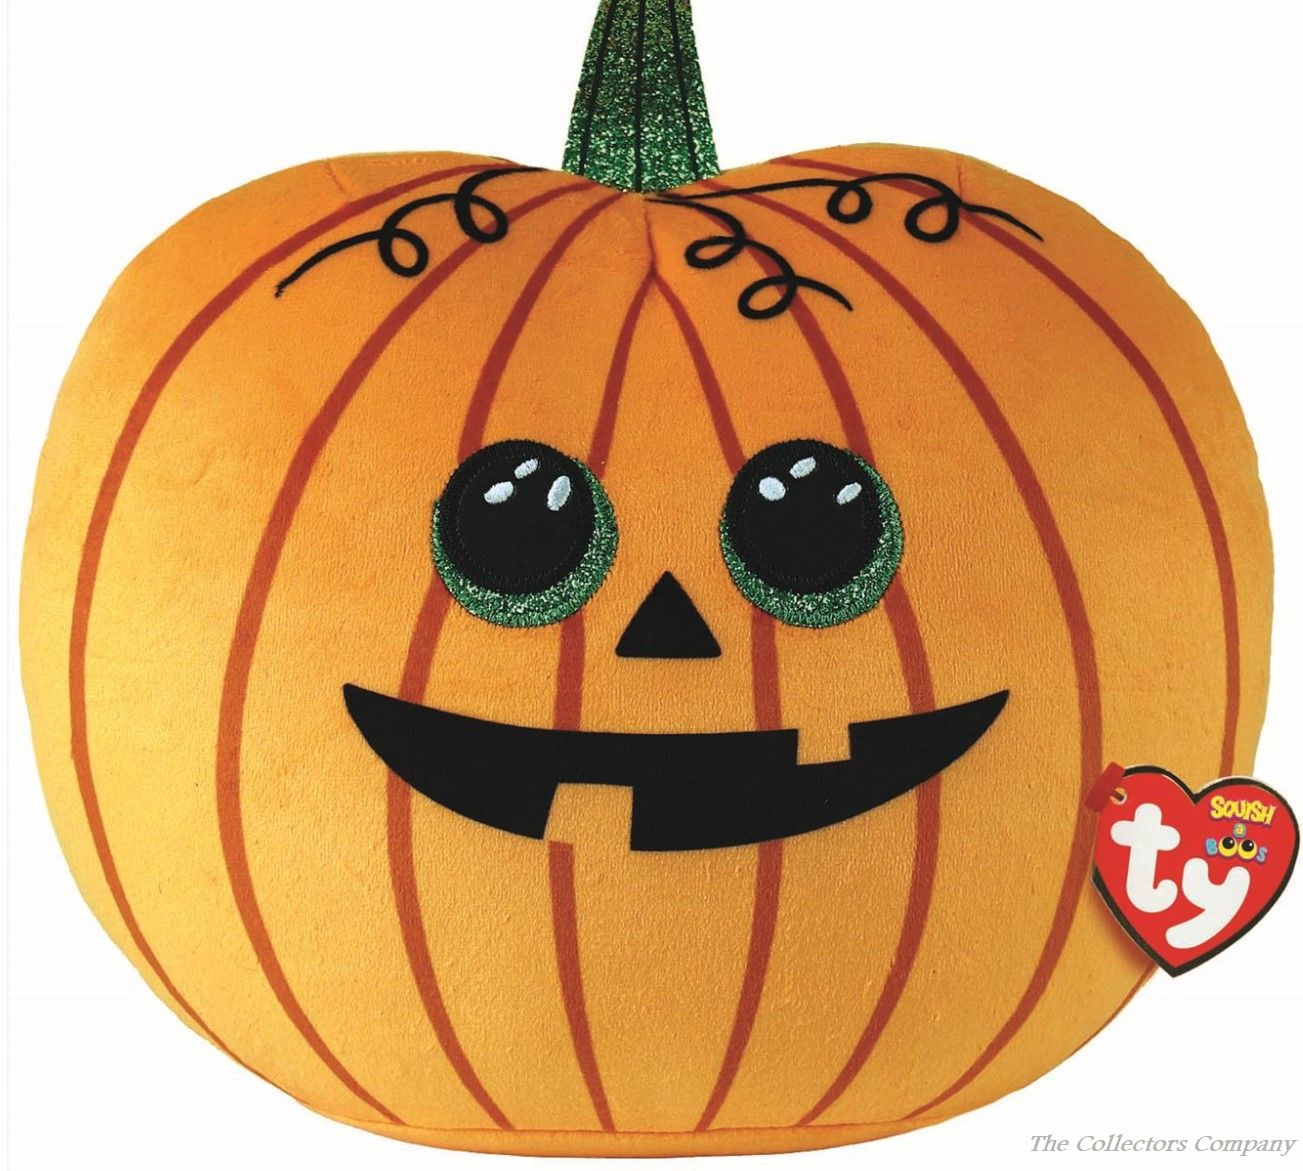 Seeds Pumpkin Halloween Limited Edition Squish-a-boo by TY 10 inches 39307